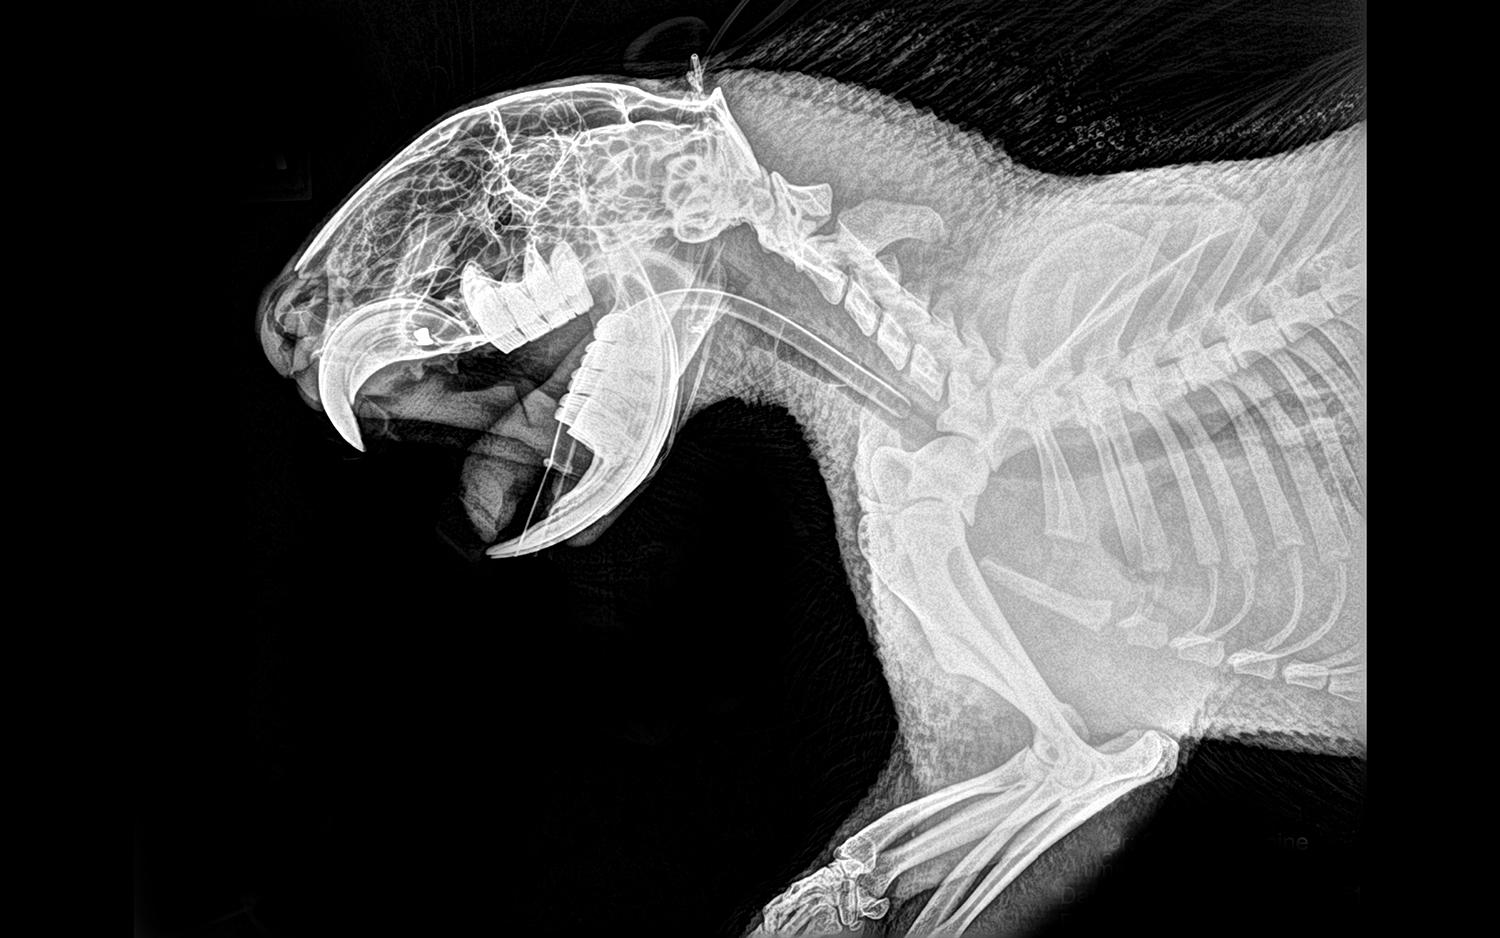 Zoo's Animal X-Rays Reveal Spooky, Scary Skeletons | Live Science